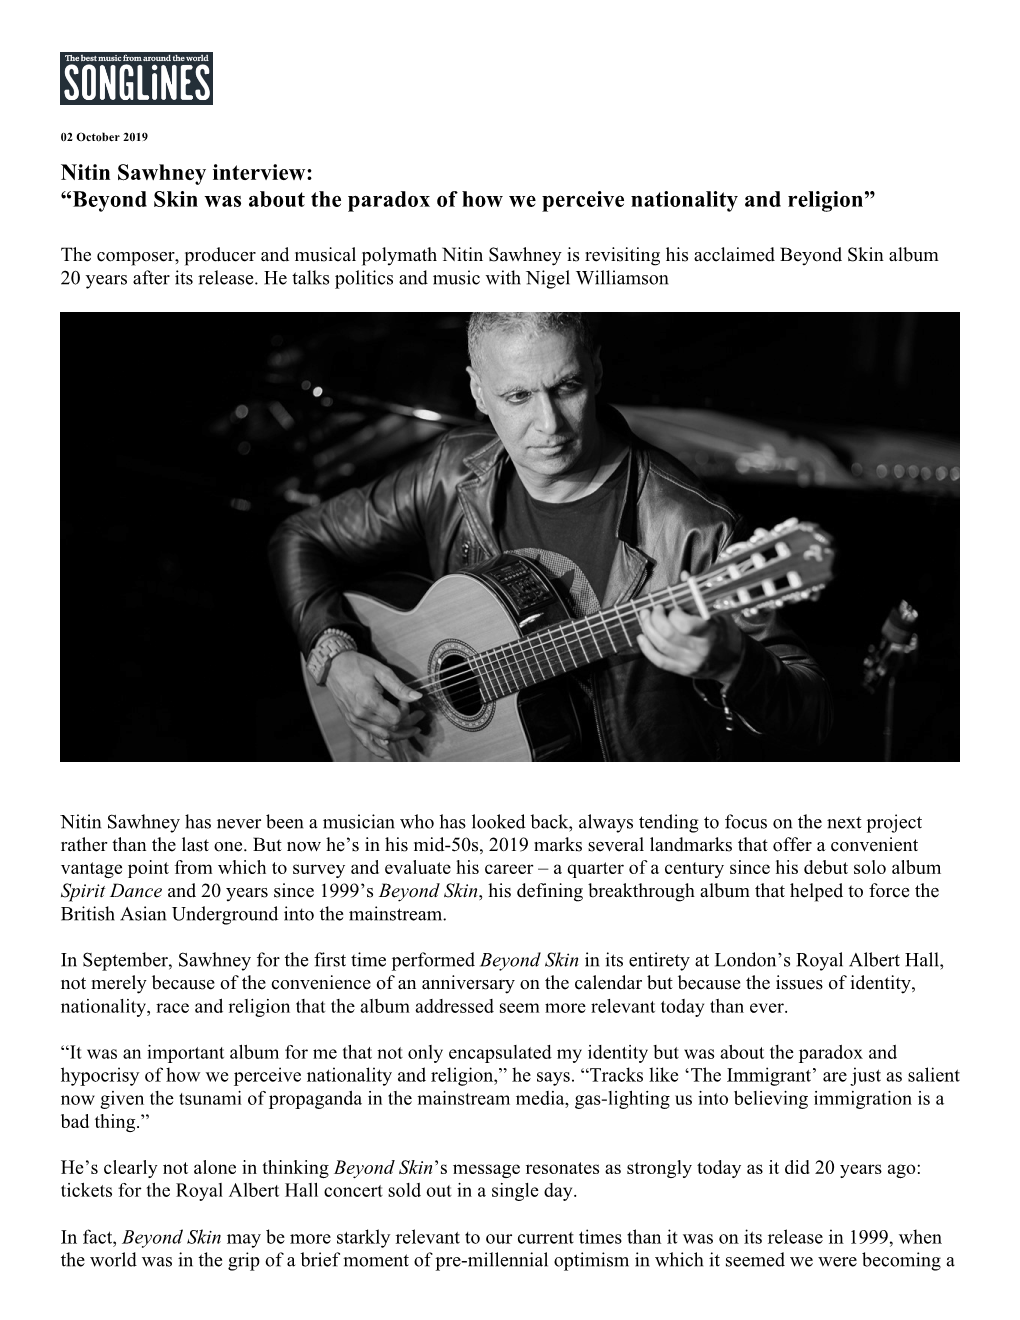 Nitin Sawhney Interview: “Beyond Skin Was About the Paradox of How We Perceive Nationality and Religion”